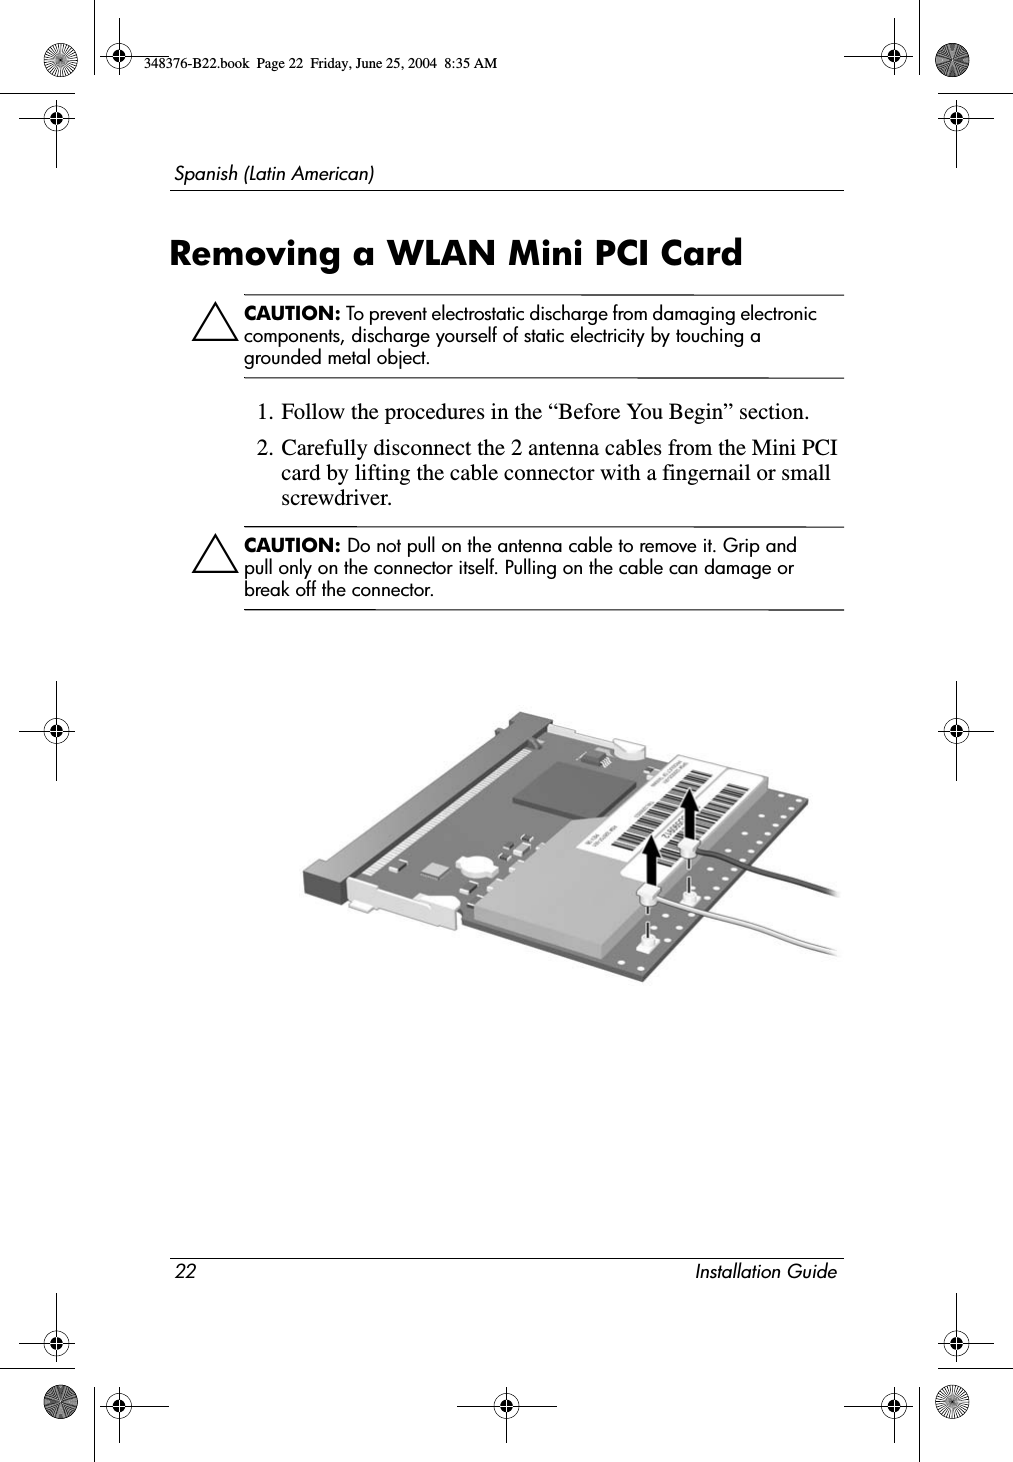 22 Installation GuideSpanish (Latin American)Removing a WLAN Mini PCI CardÄCAUTION: To prevent electrostatic discharge from damaging electronic components, discharge yourself of static electricity by touching a grounded metal object.1. Follow the procedures in the “Before You Begin” section.2. Carefully disconnect the 2 antenna cables from the Mini PCI card by lifting the cable connector with a fingernail or small screwdriver.ÄCAUTION: Do not pull on the antenna cable to remove it. Grip and pull only on the connector itself. Pulling on the cable can damage or break off the connector.348376-B22.book  Page 22  Friday, June 25, 2004  8:35 AM